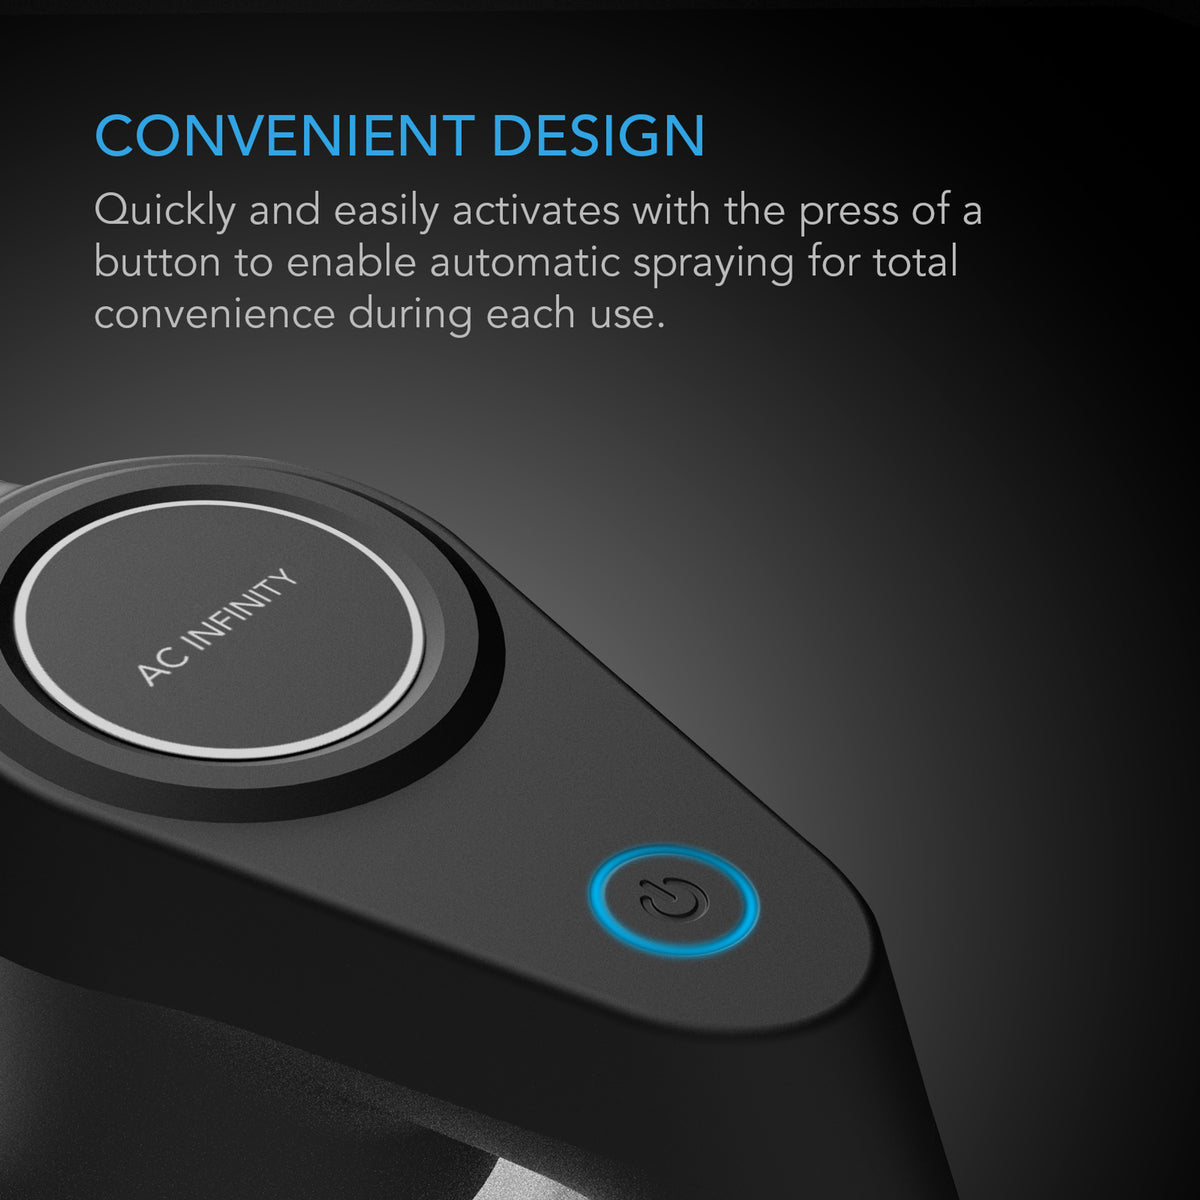 Convenient design by AC Infinity